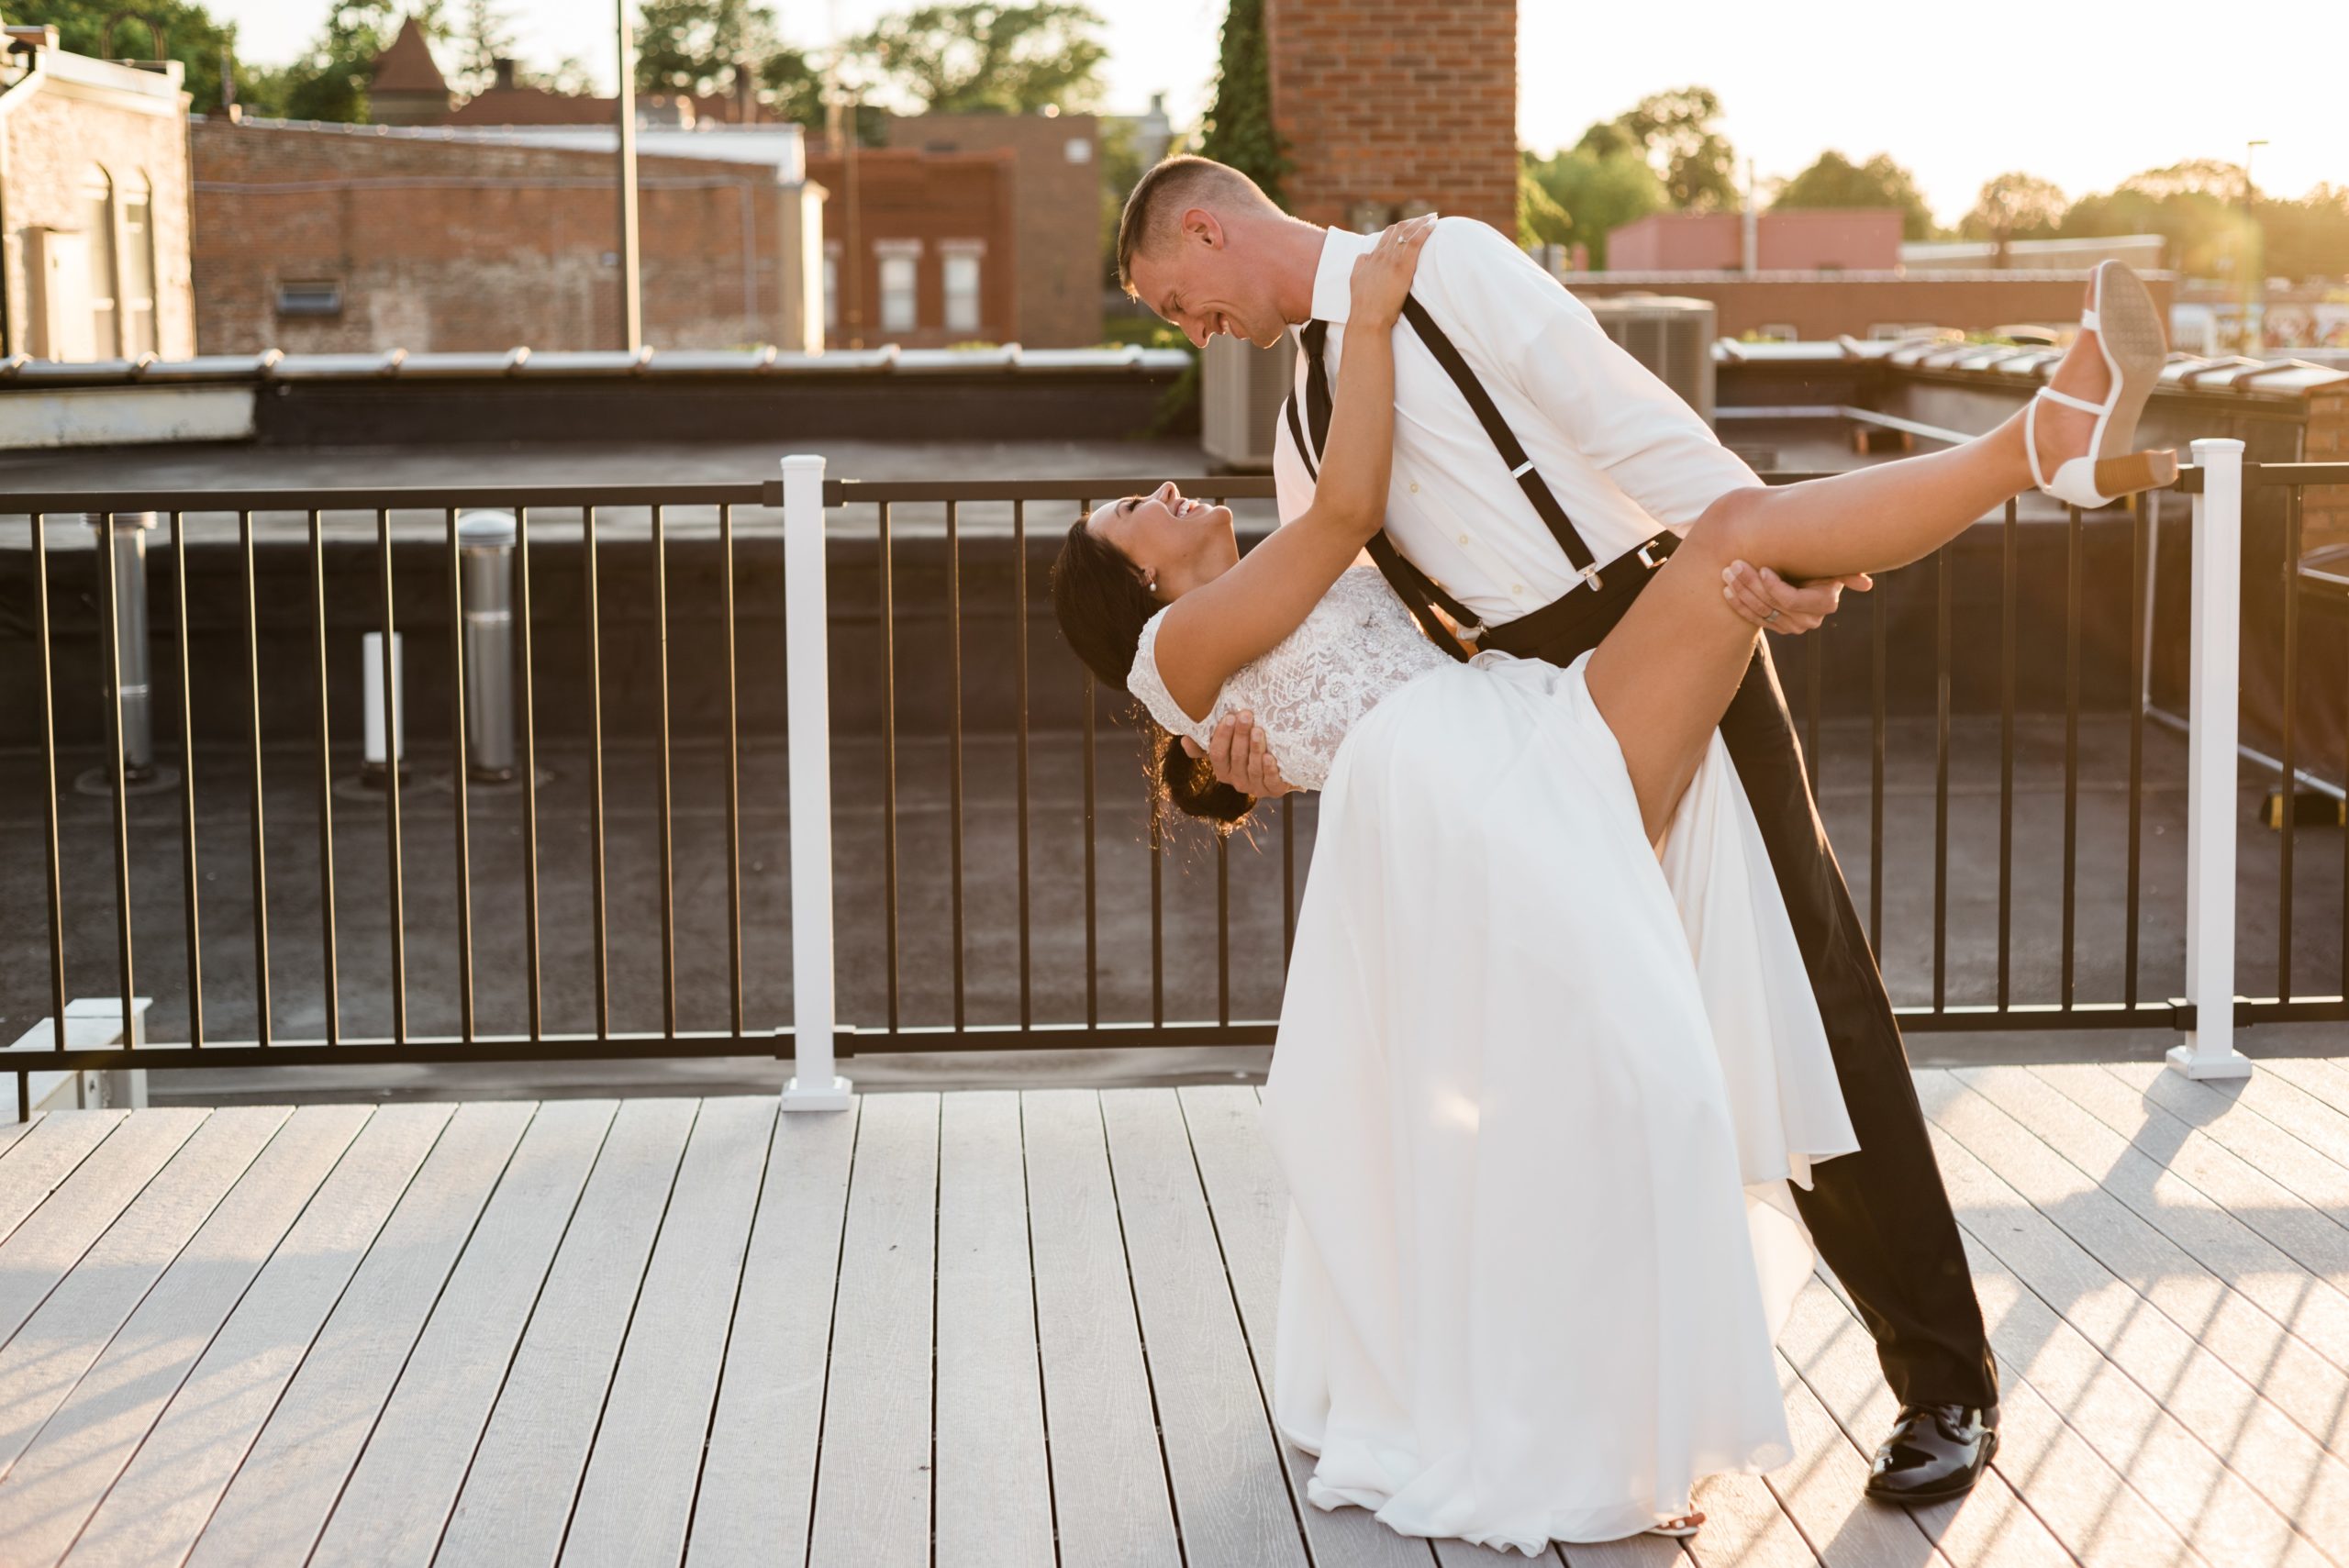 Groom dipping bride on a rooftop.